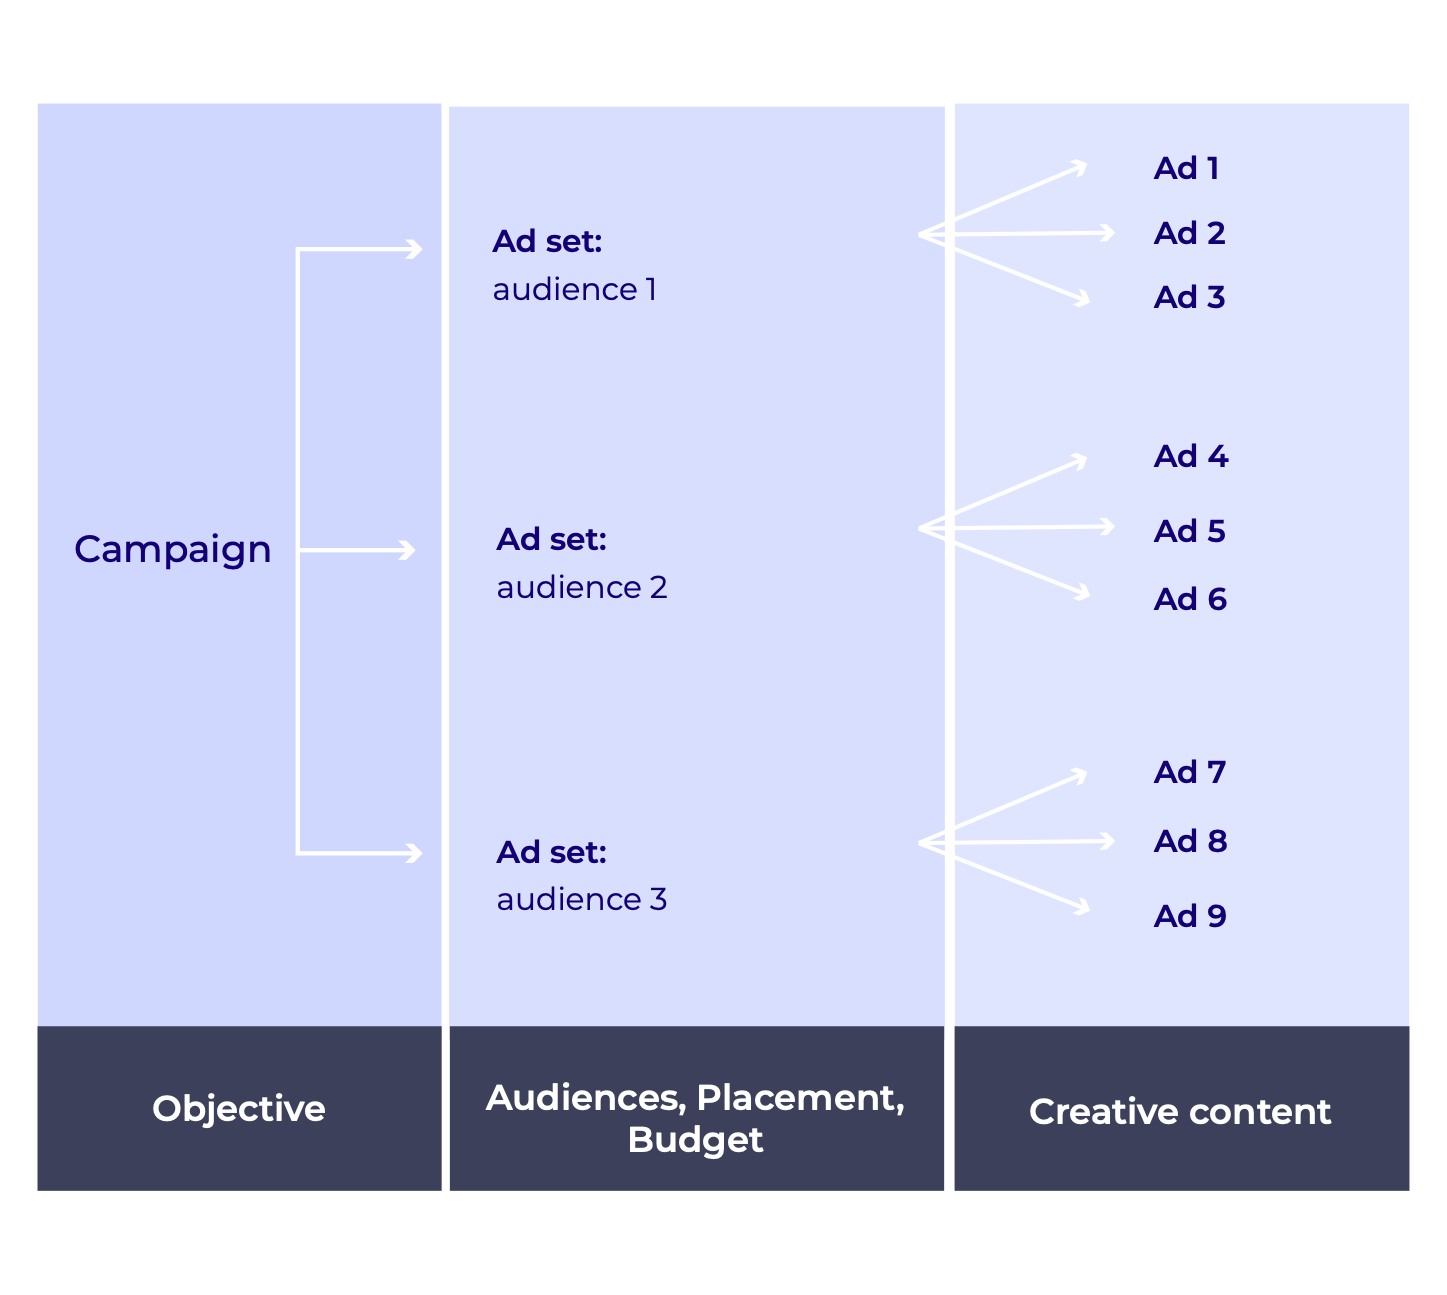 Table divided into 3 columns: objectives and audiences, budget, placement, and creative content. We have one campaign in the objective column.  This campaign generates 3 different audiences. Each audience generates 3 different ads.